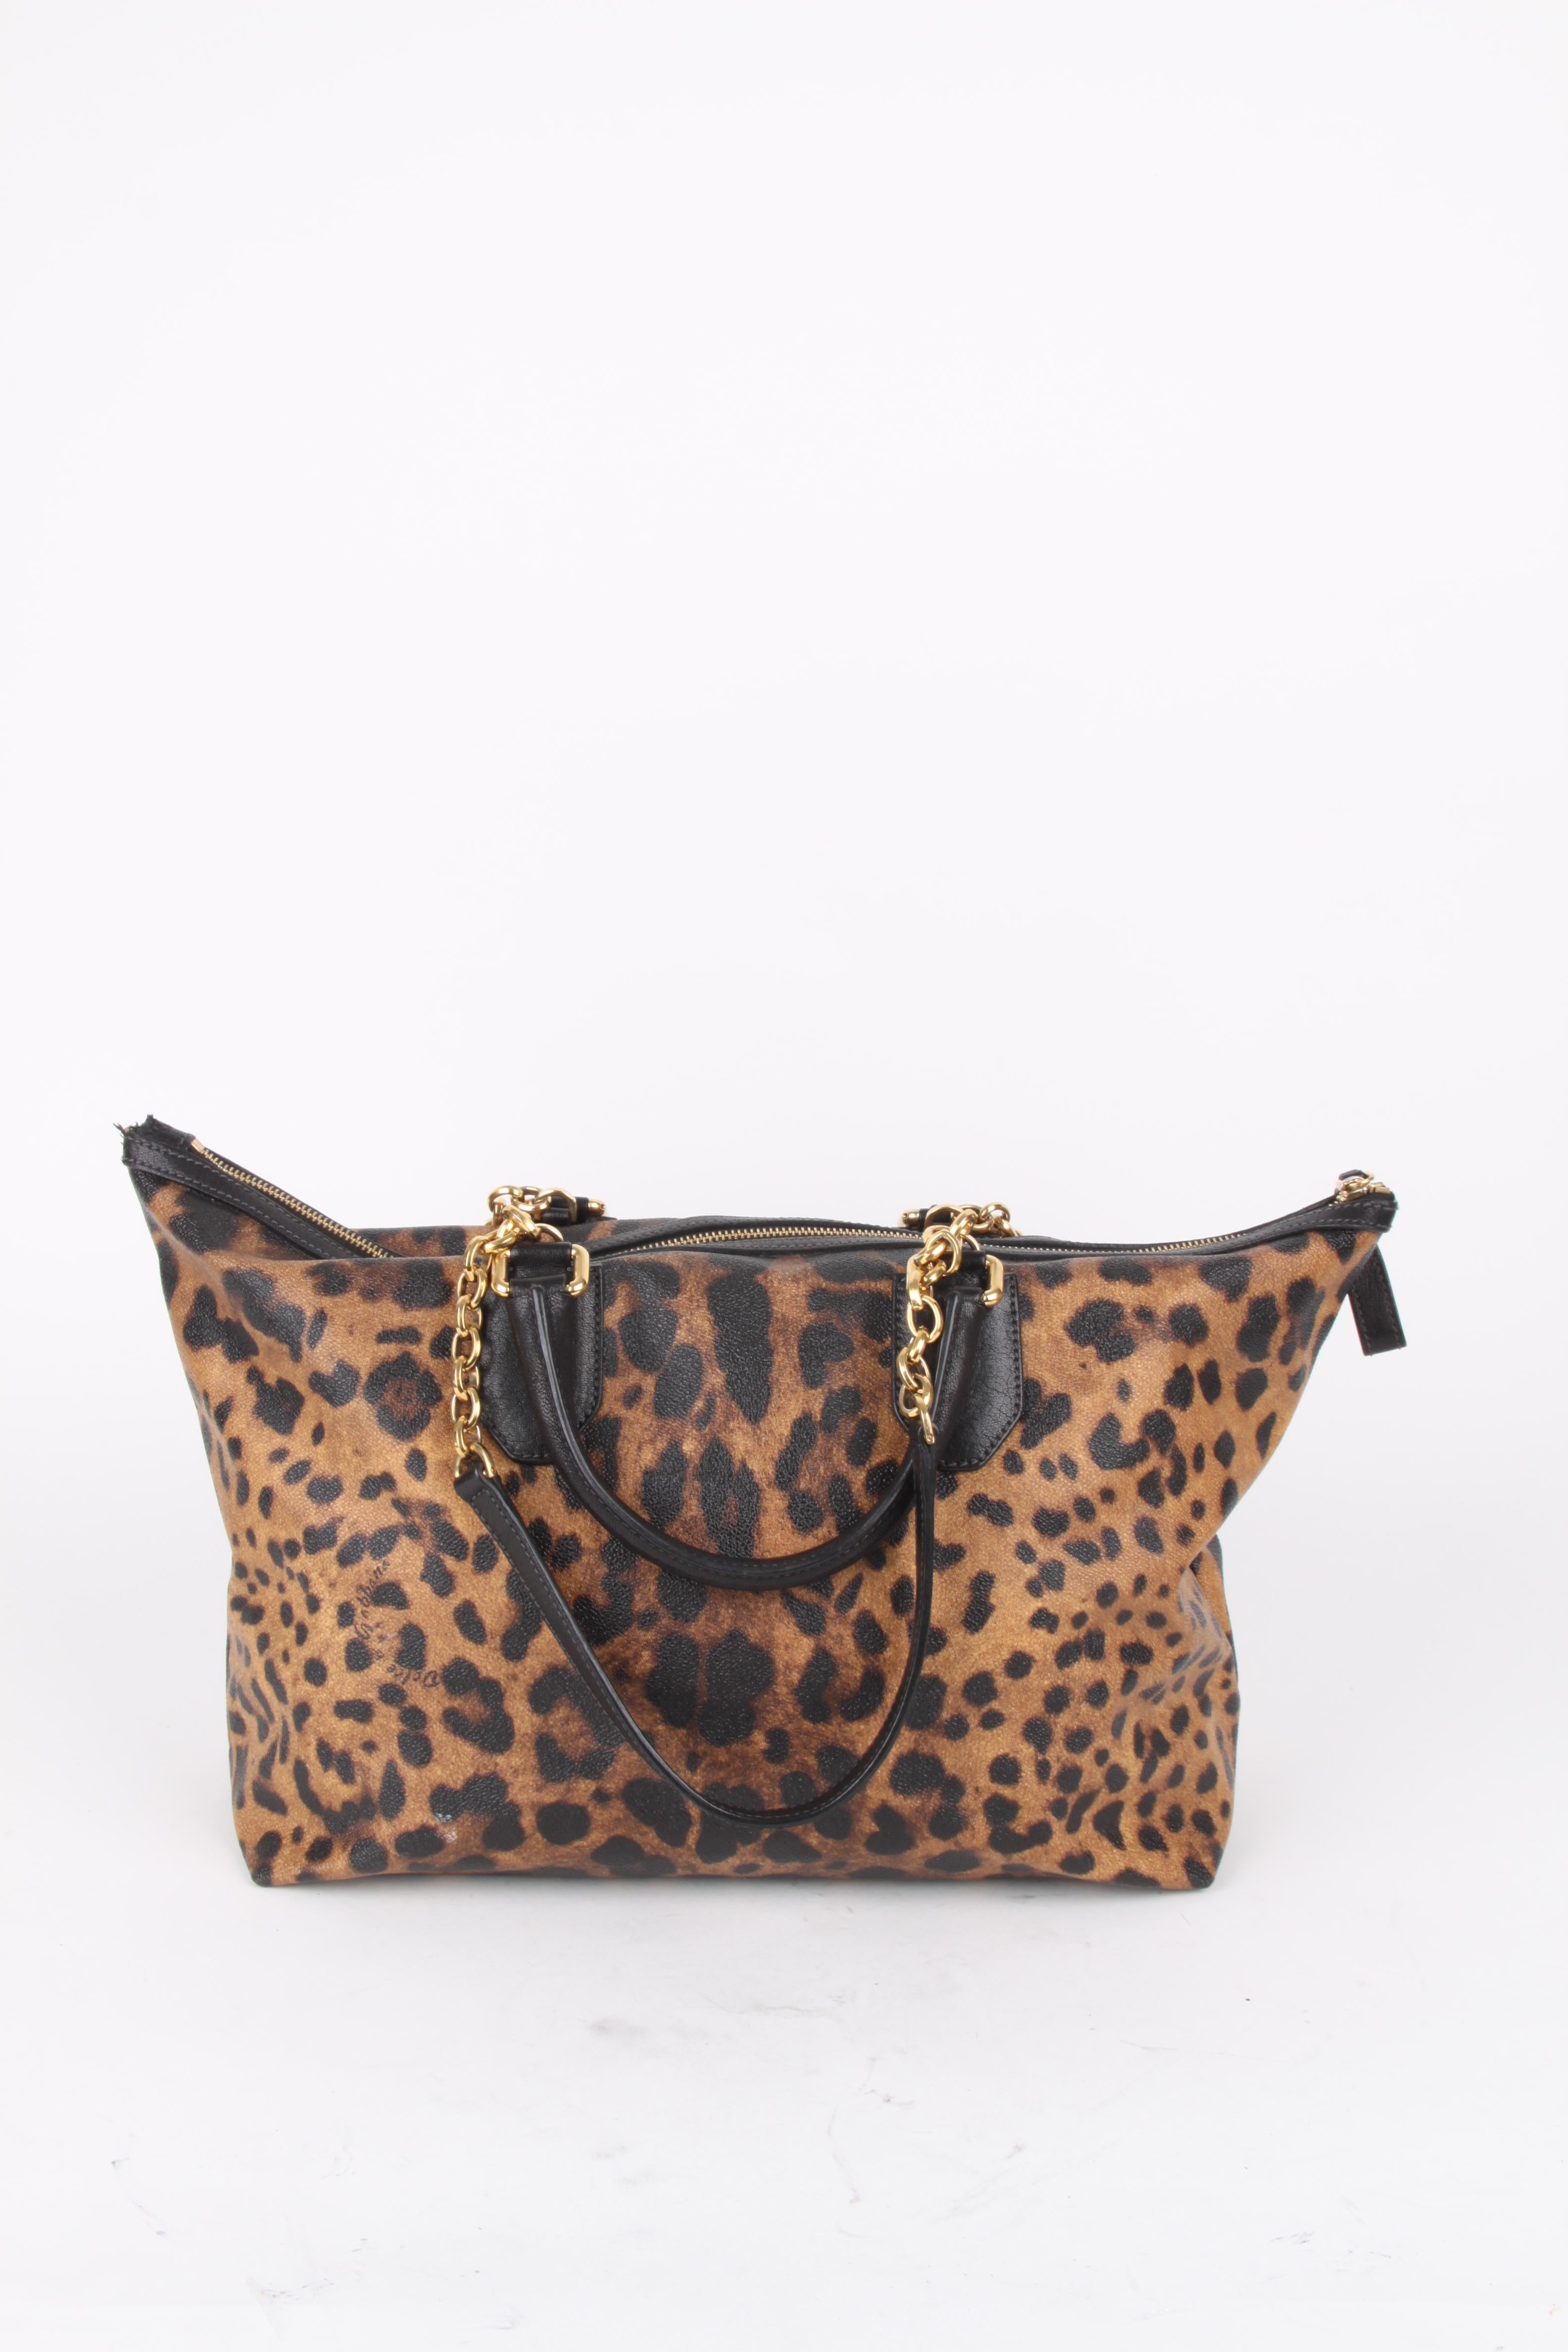 Women's or Men's   Dolce and Gabbana Brown Canvas Leather Leopard Print Handbag   